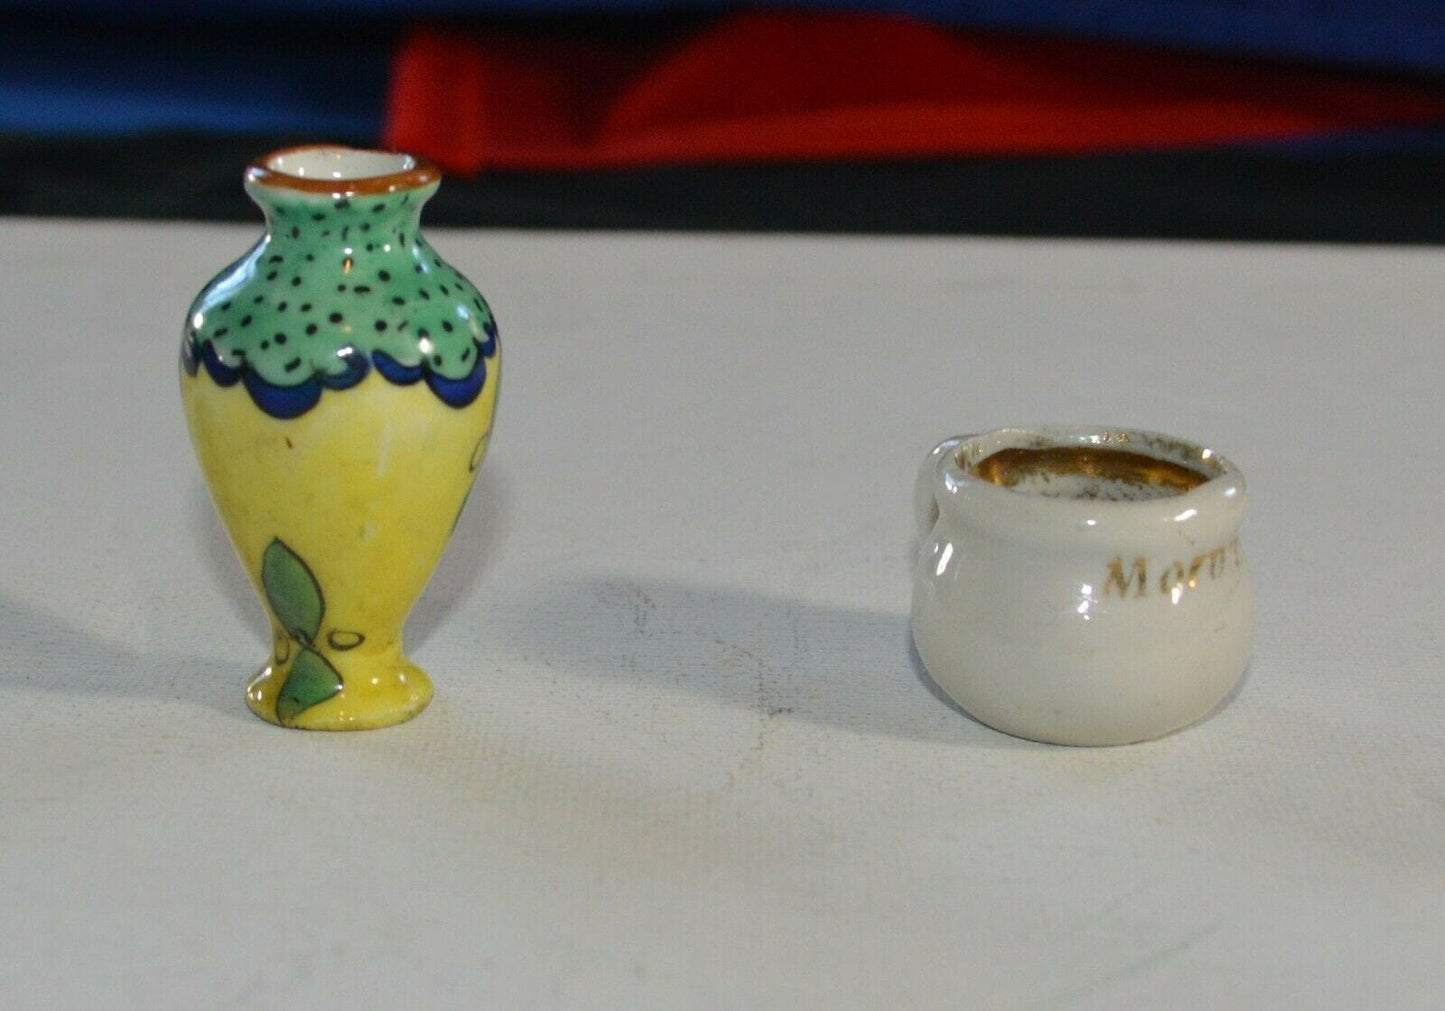 MINIATURE VASE AND MINIATURE CHAMBER POT(PREVIOUSLY OWNED) GOOD CONDITION - TMD167207